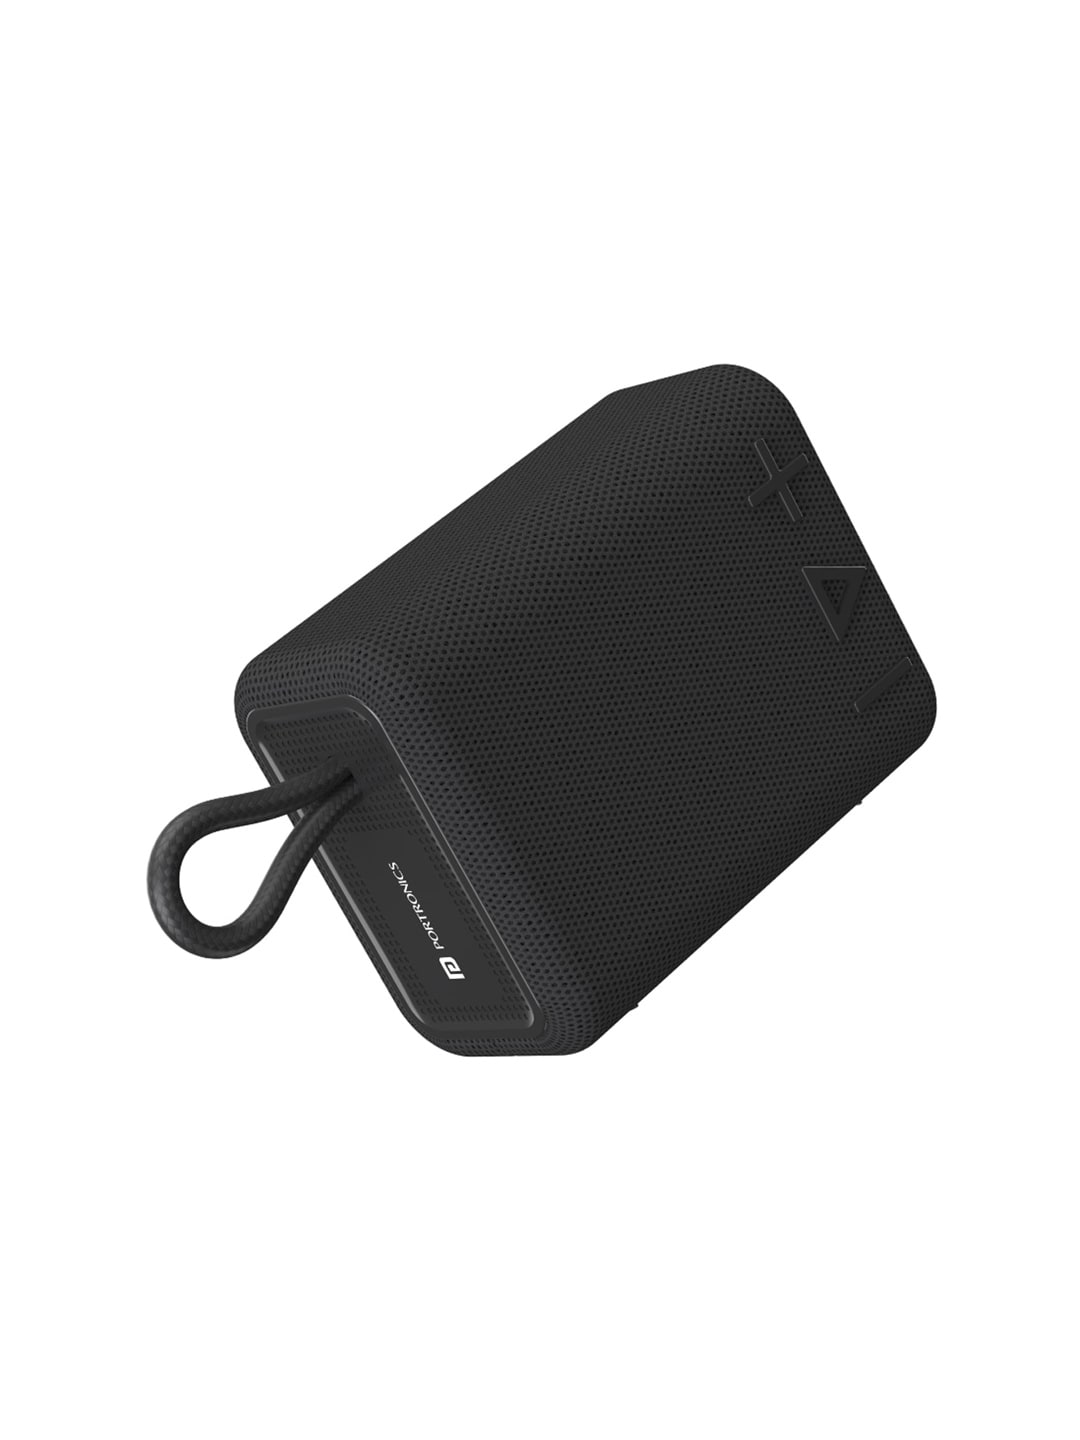 Portronics Black Solid Breeze 4 Portable Bluetooth Speaker Price in India